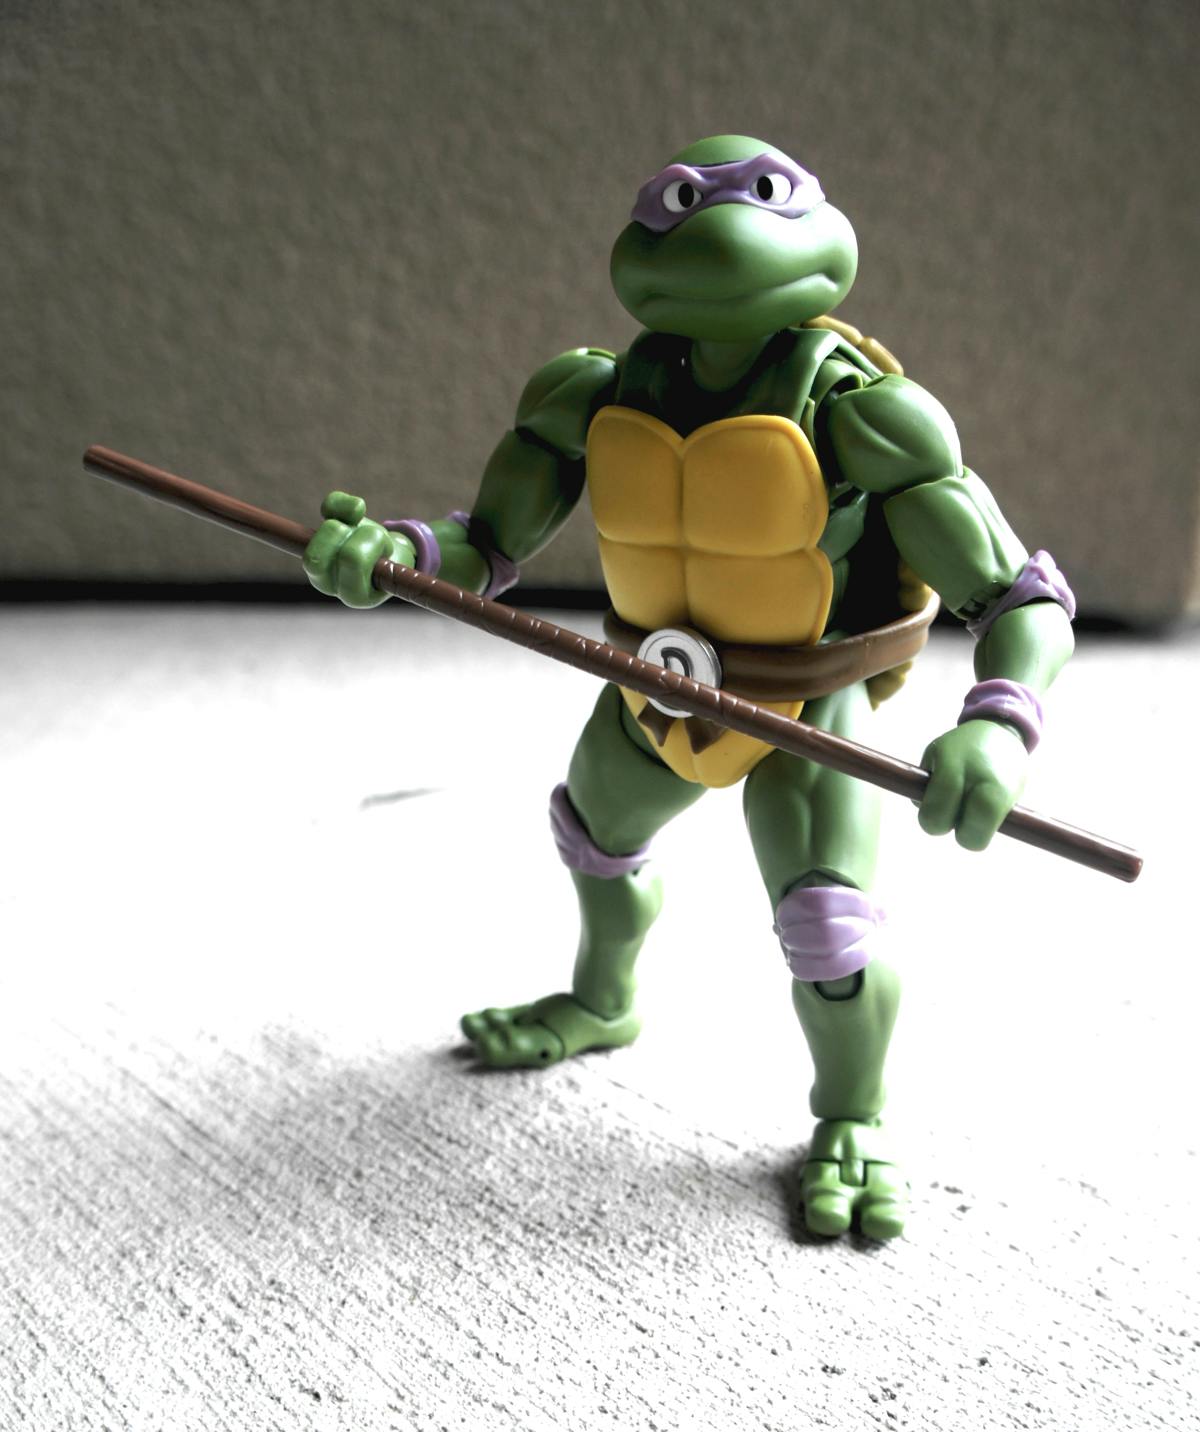 All pizzas aside, Donatello is deadly serious in battle.